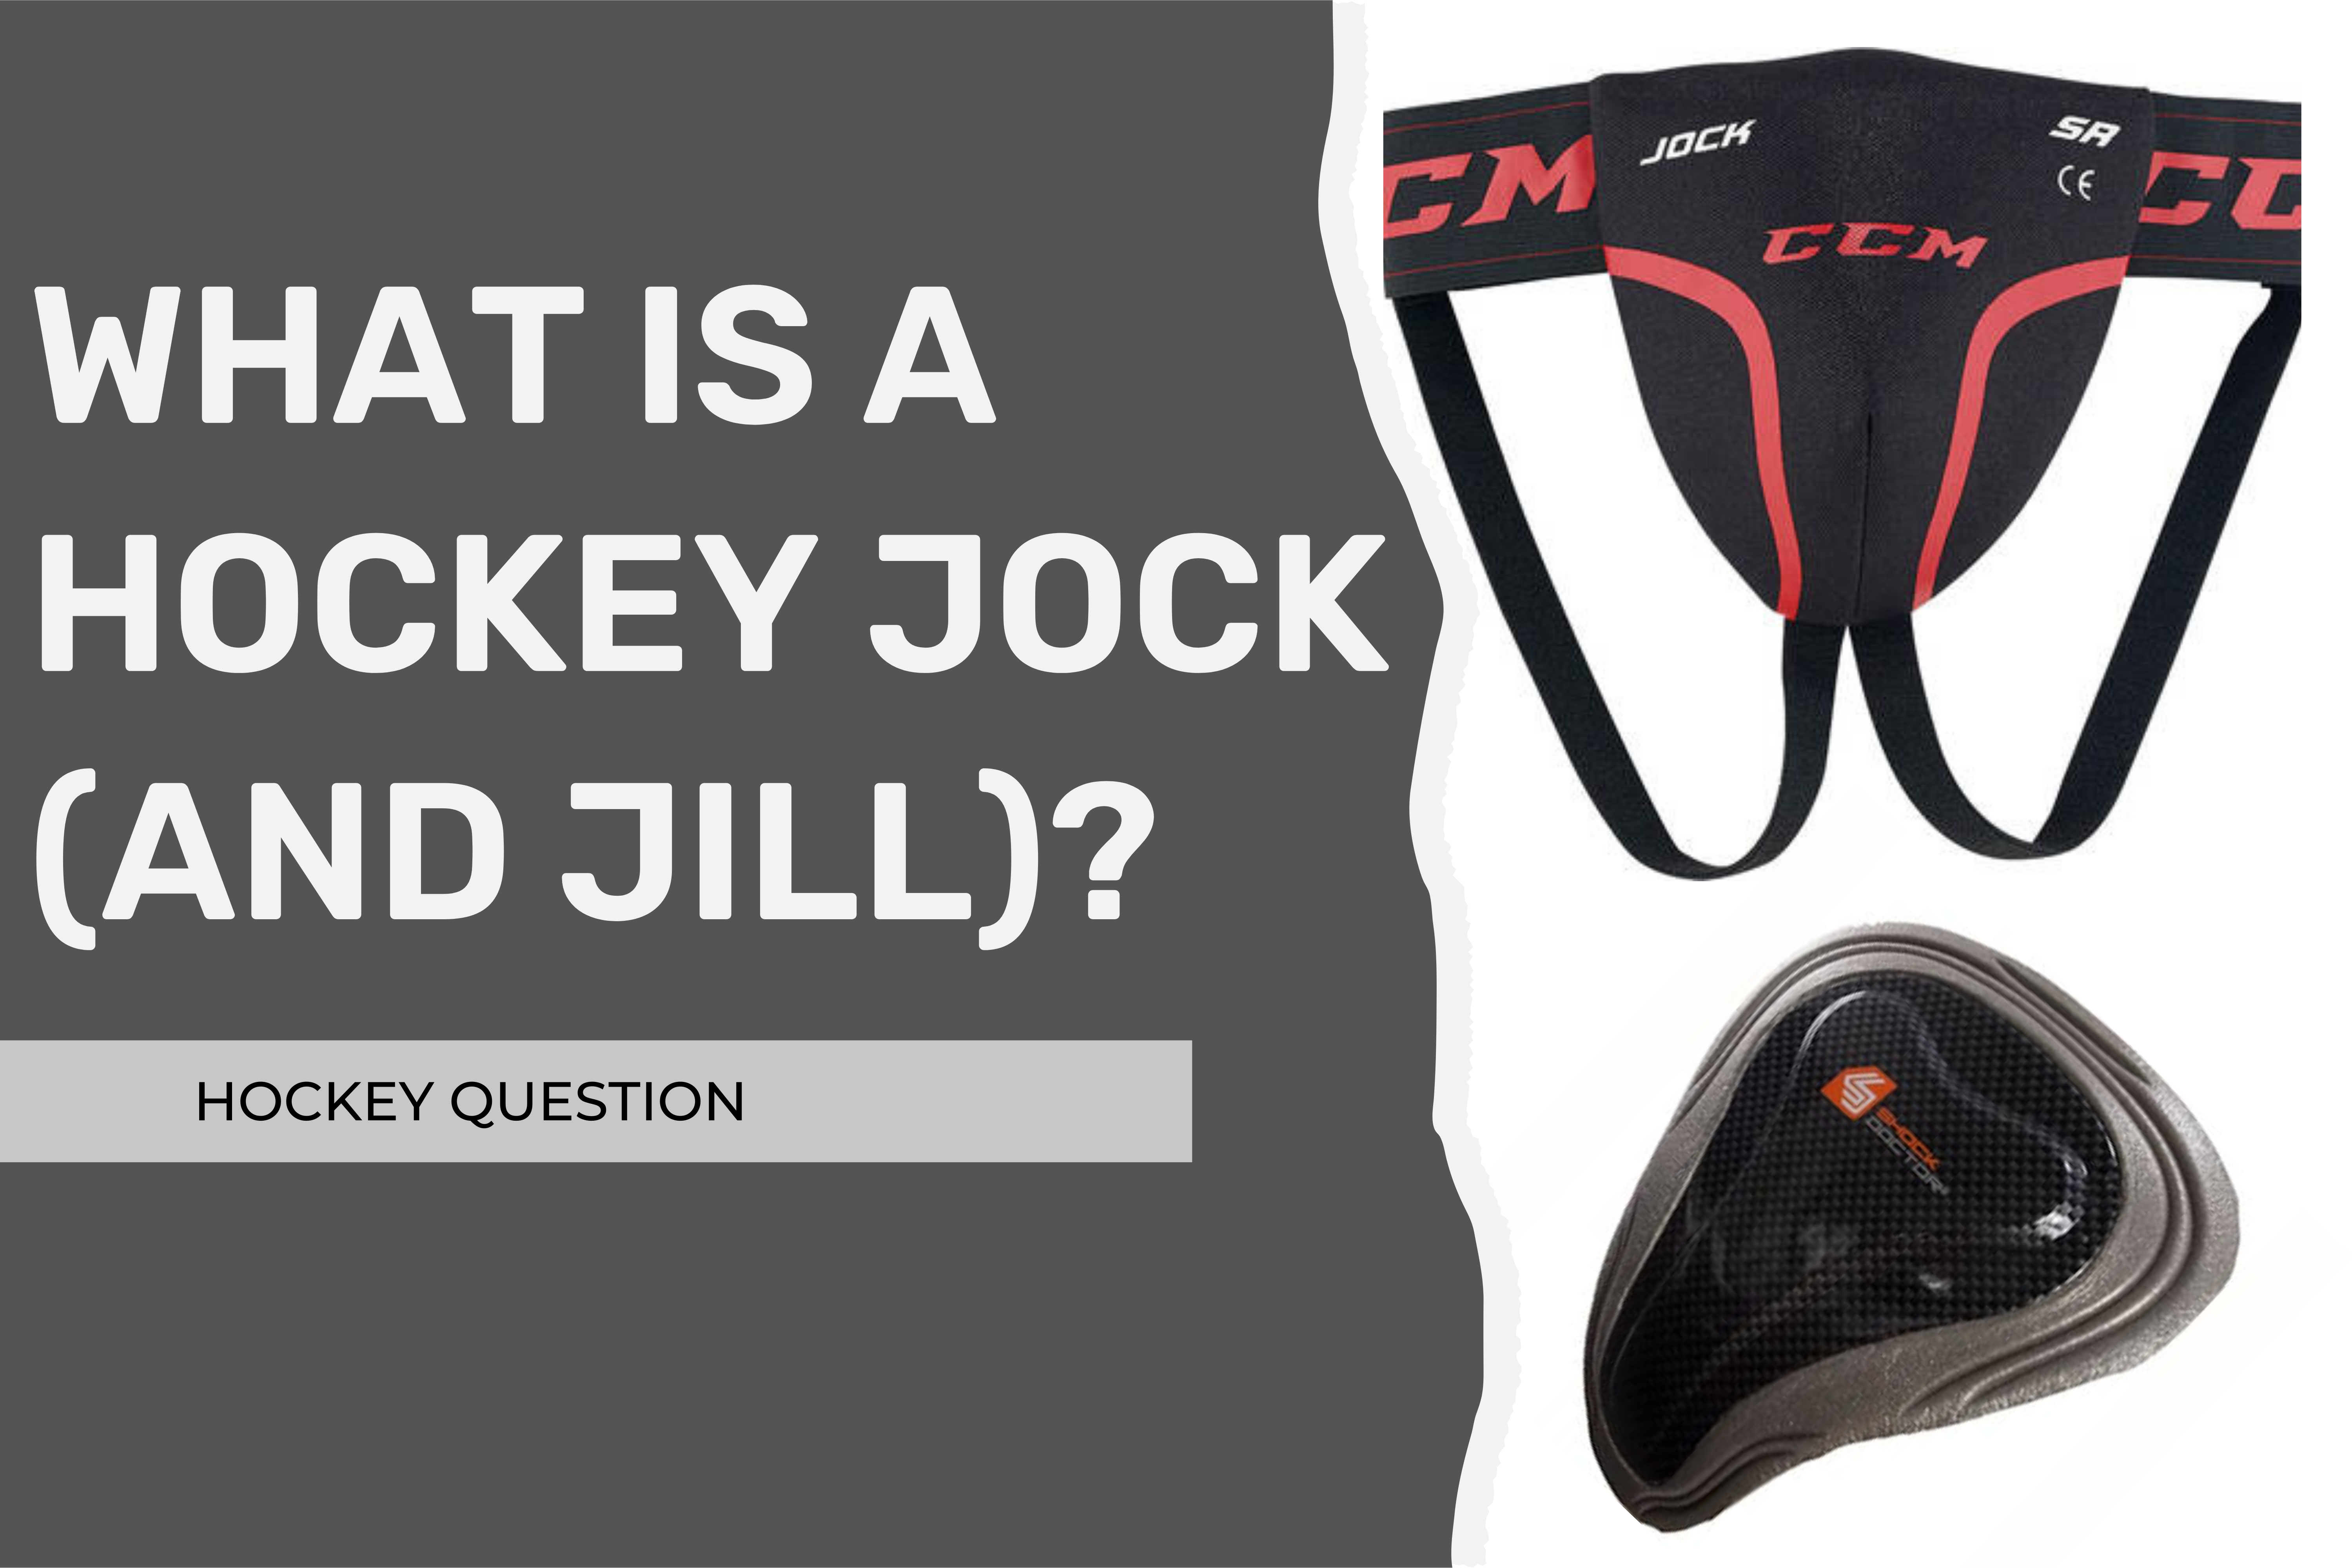 What Is a Hockey Jock (and Jill?)